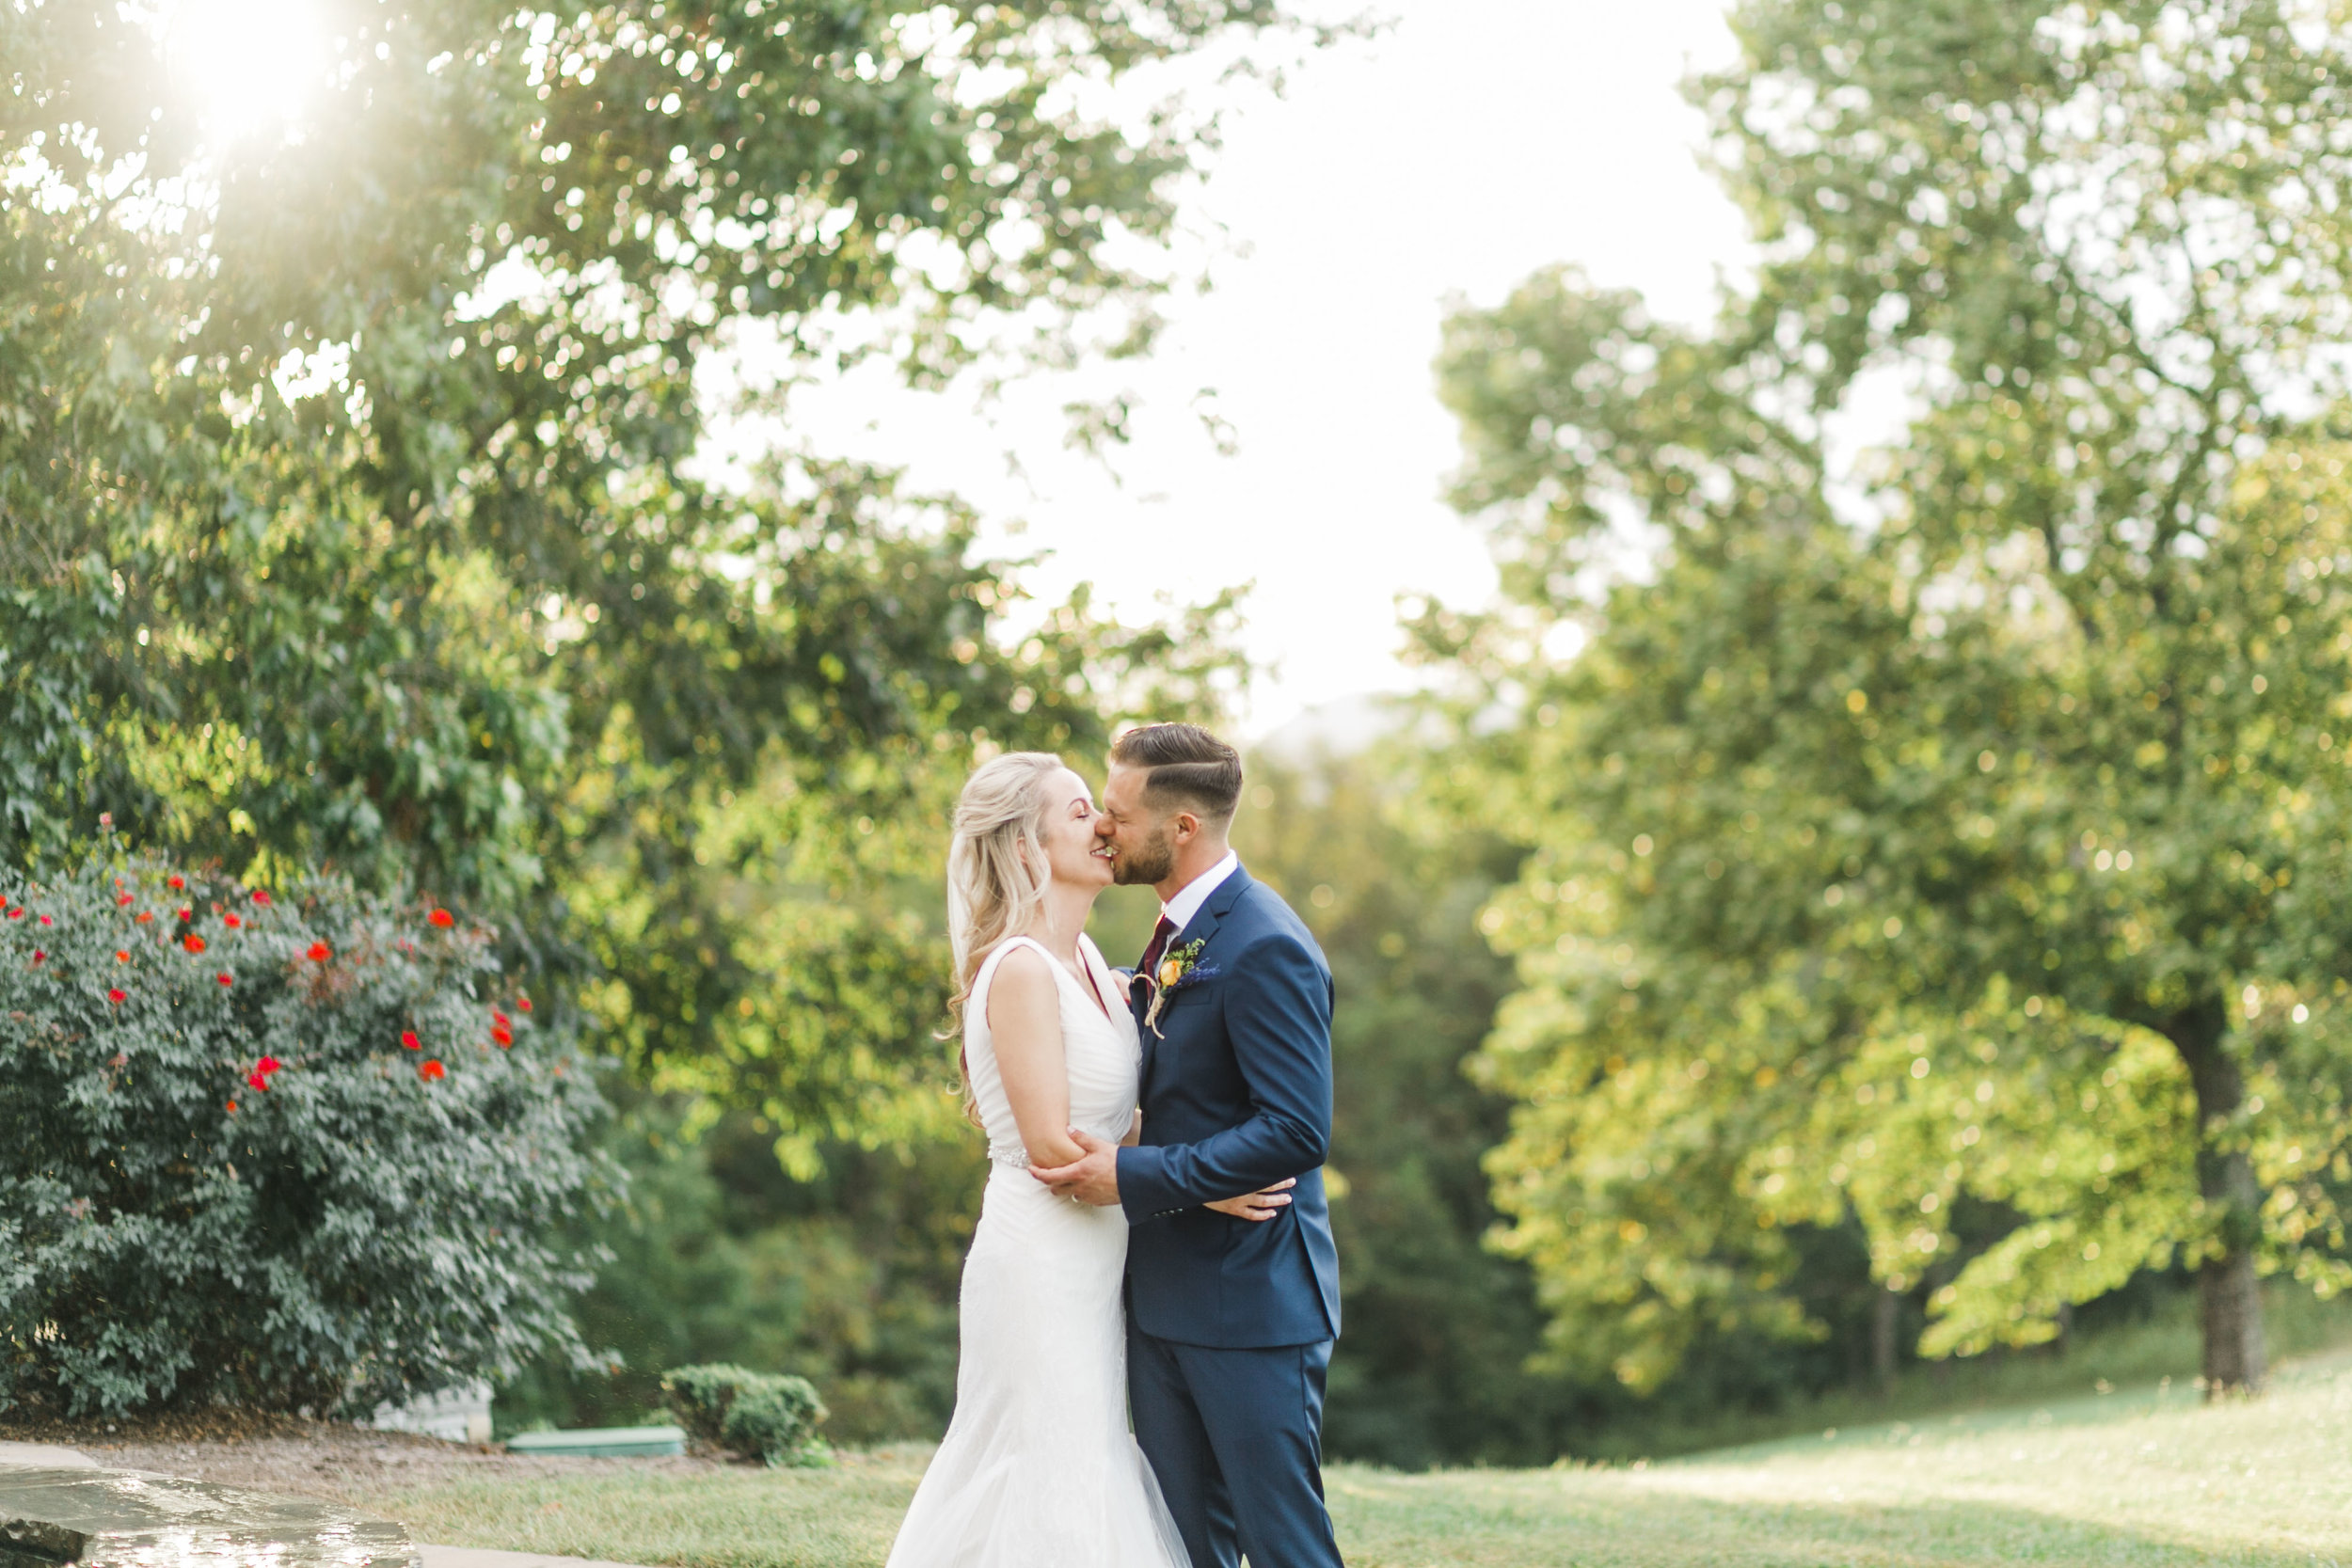 colorful wedding photographer tn wedding knoxville